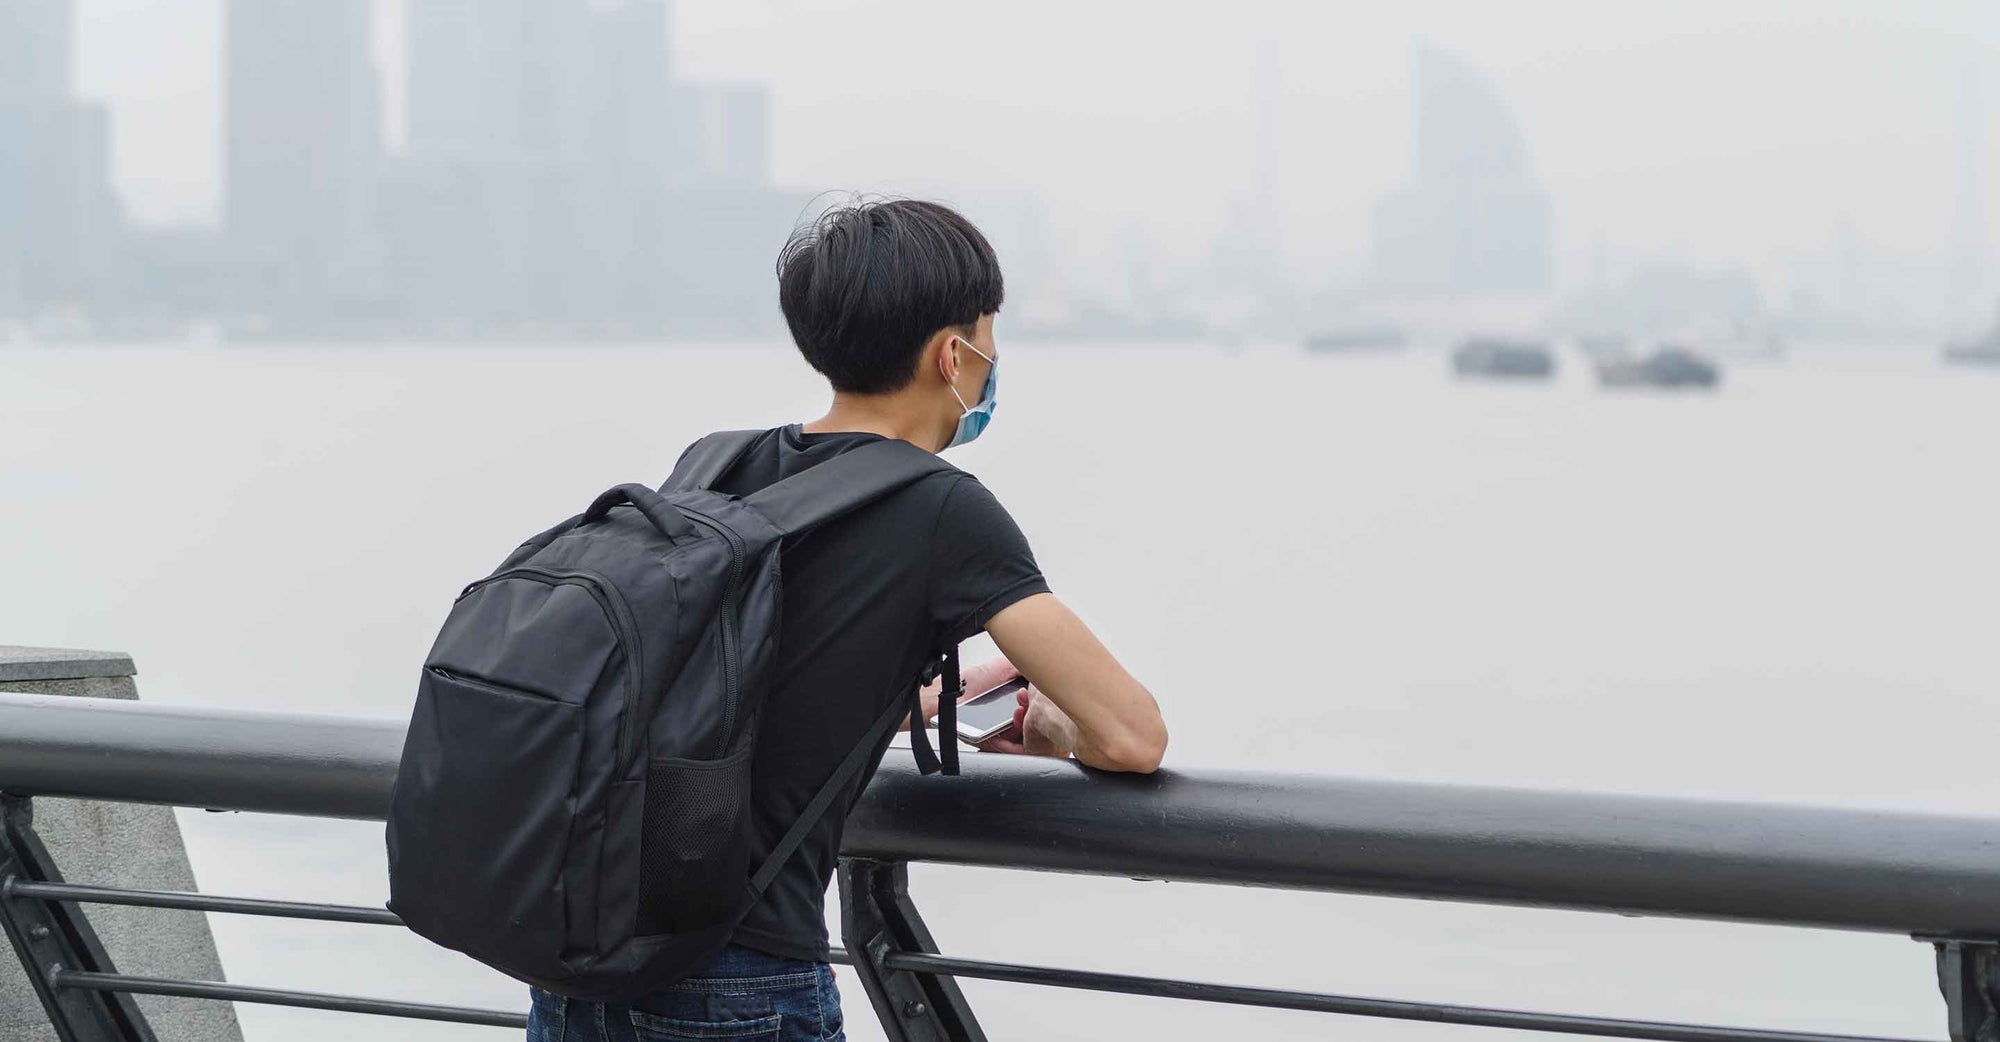 A young man looking out across the harbor of a major city, its skyline in the distance, that appears shrouded in a polluted haze.